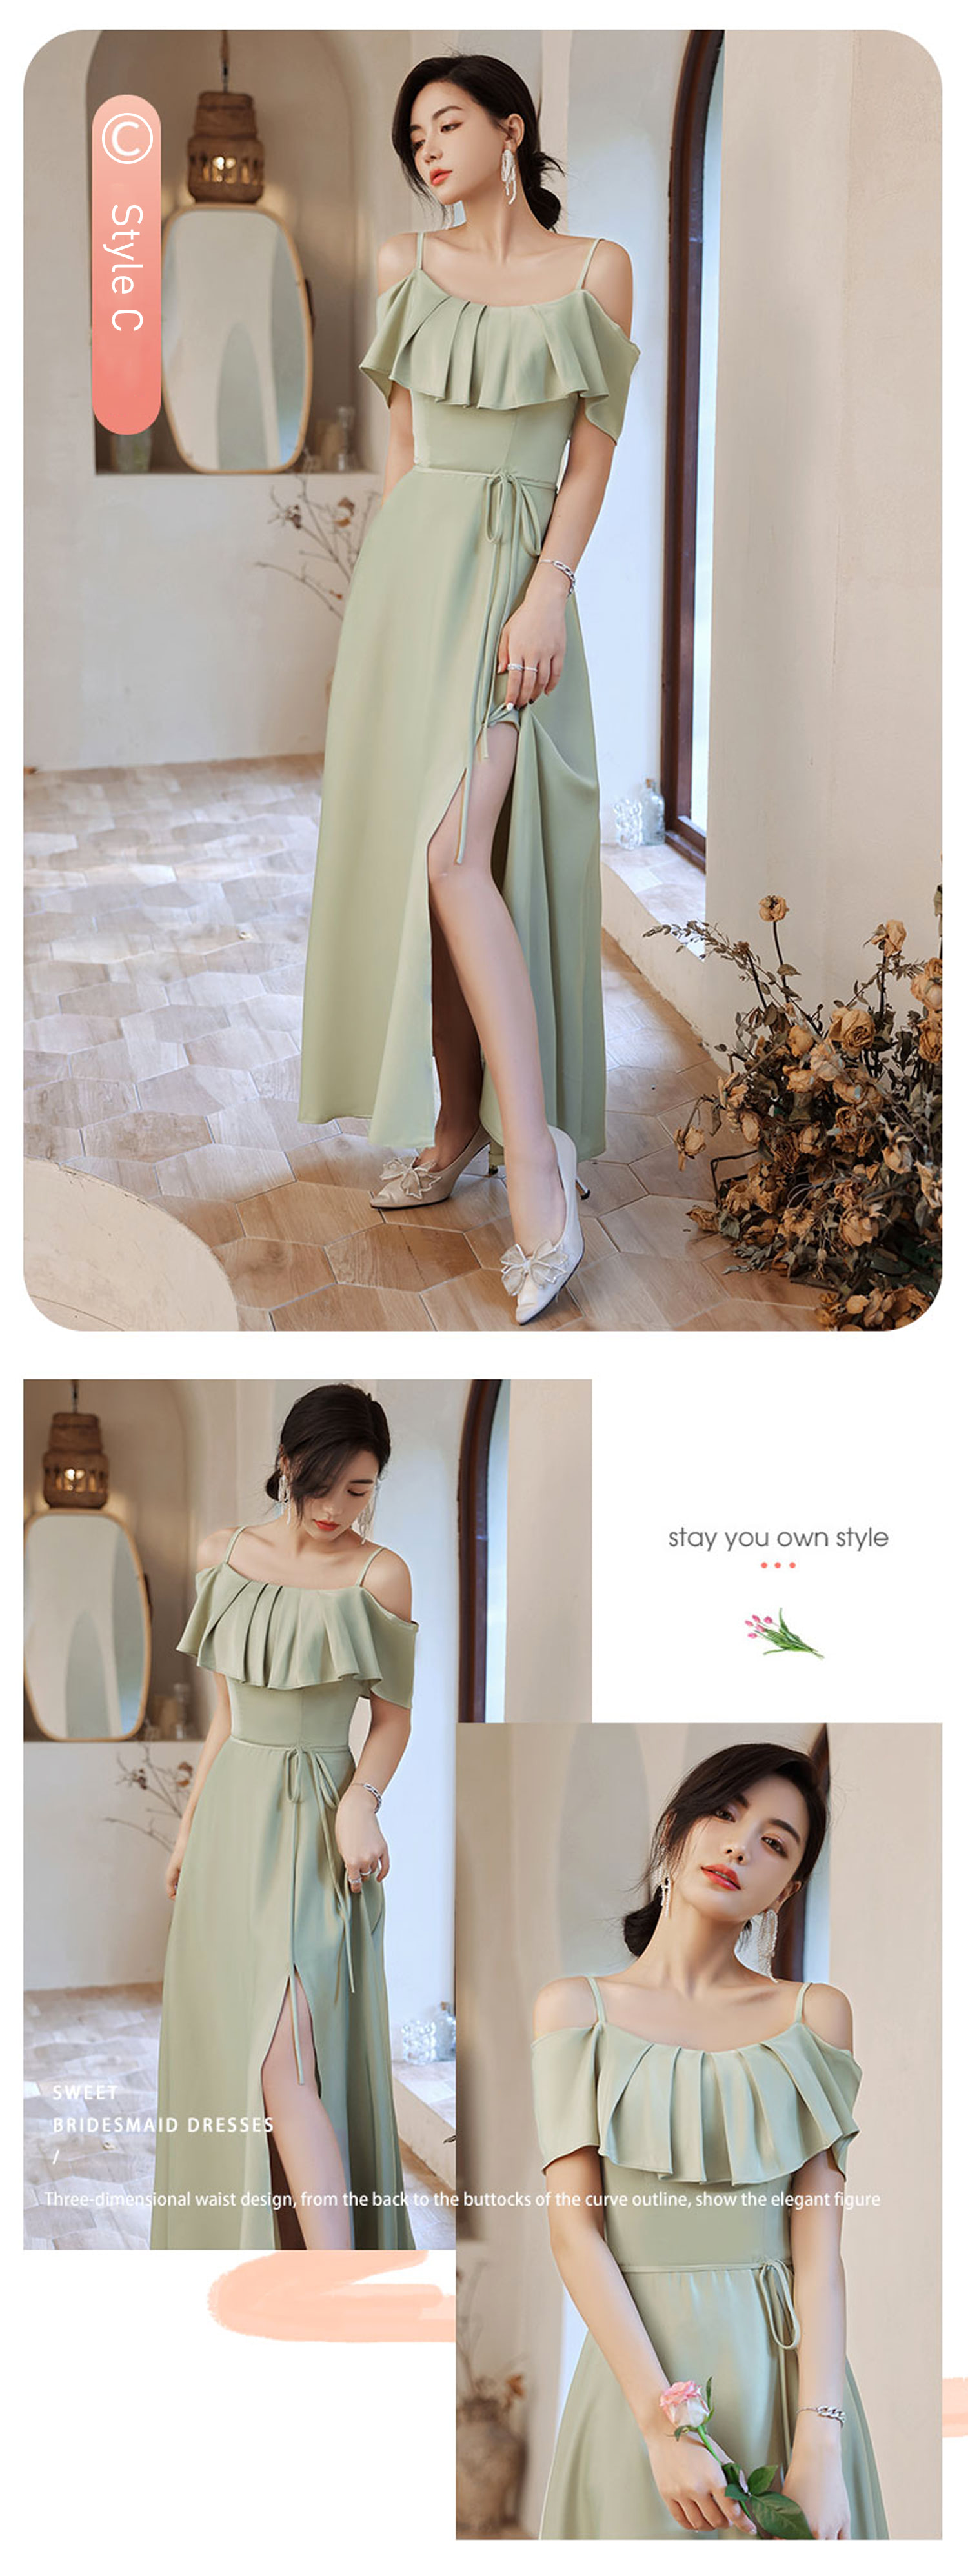 Simple-Olive-Green-Satin-Bridesmaid-Dress-Beach-Wedding-Guest-Outfit19